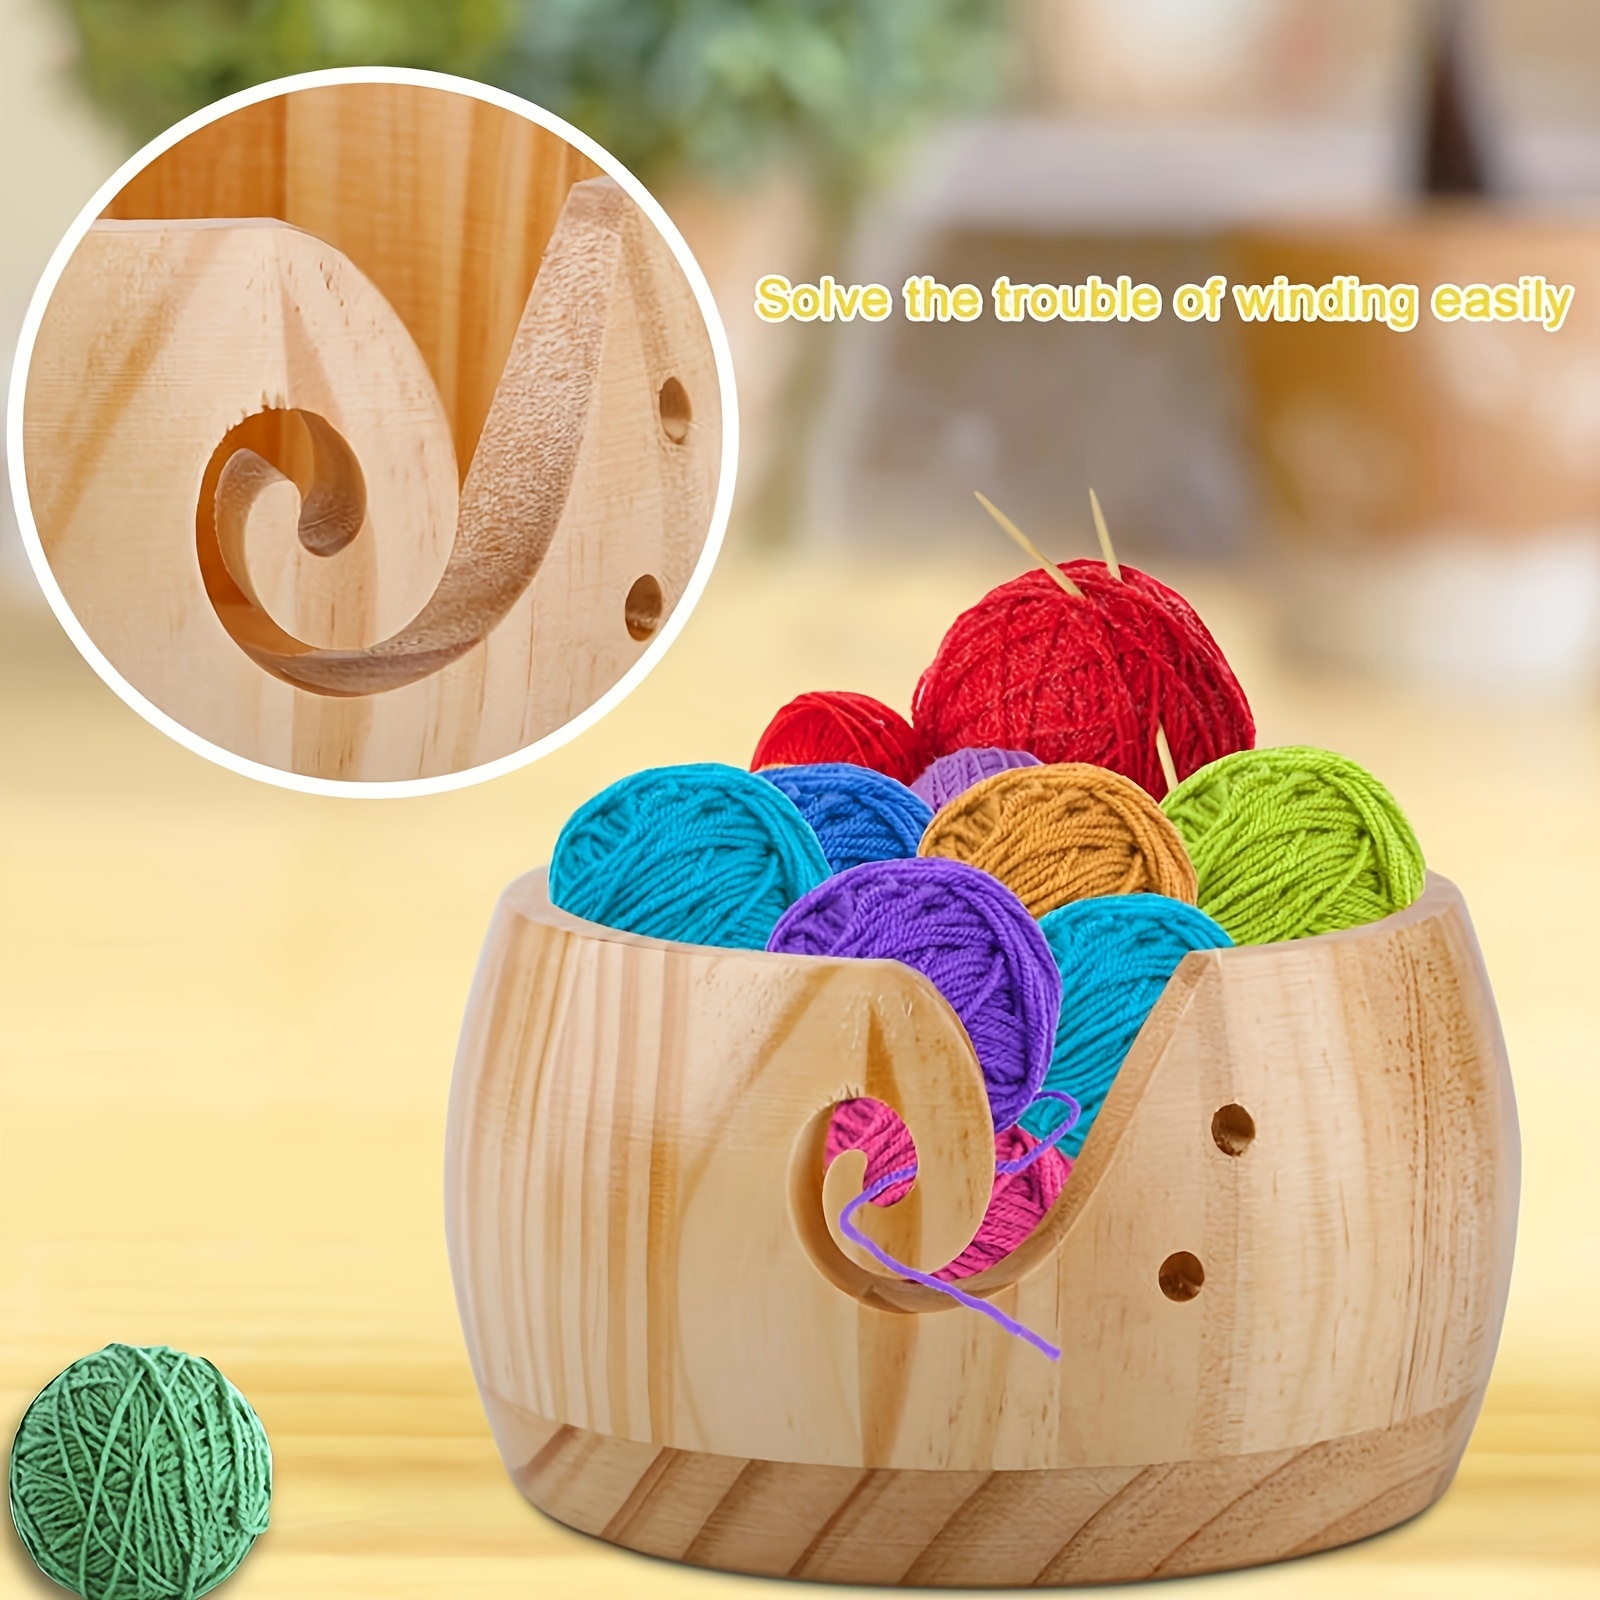 Portable Wrist Yarn Holder Yarn Storage Prevents Yarn Tangling and  Misalignment Yarn Holder for Knitting, Knitting Supplies Gift for The Craft  Lovers